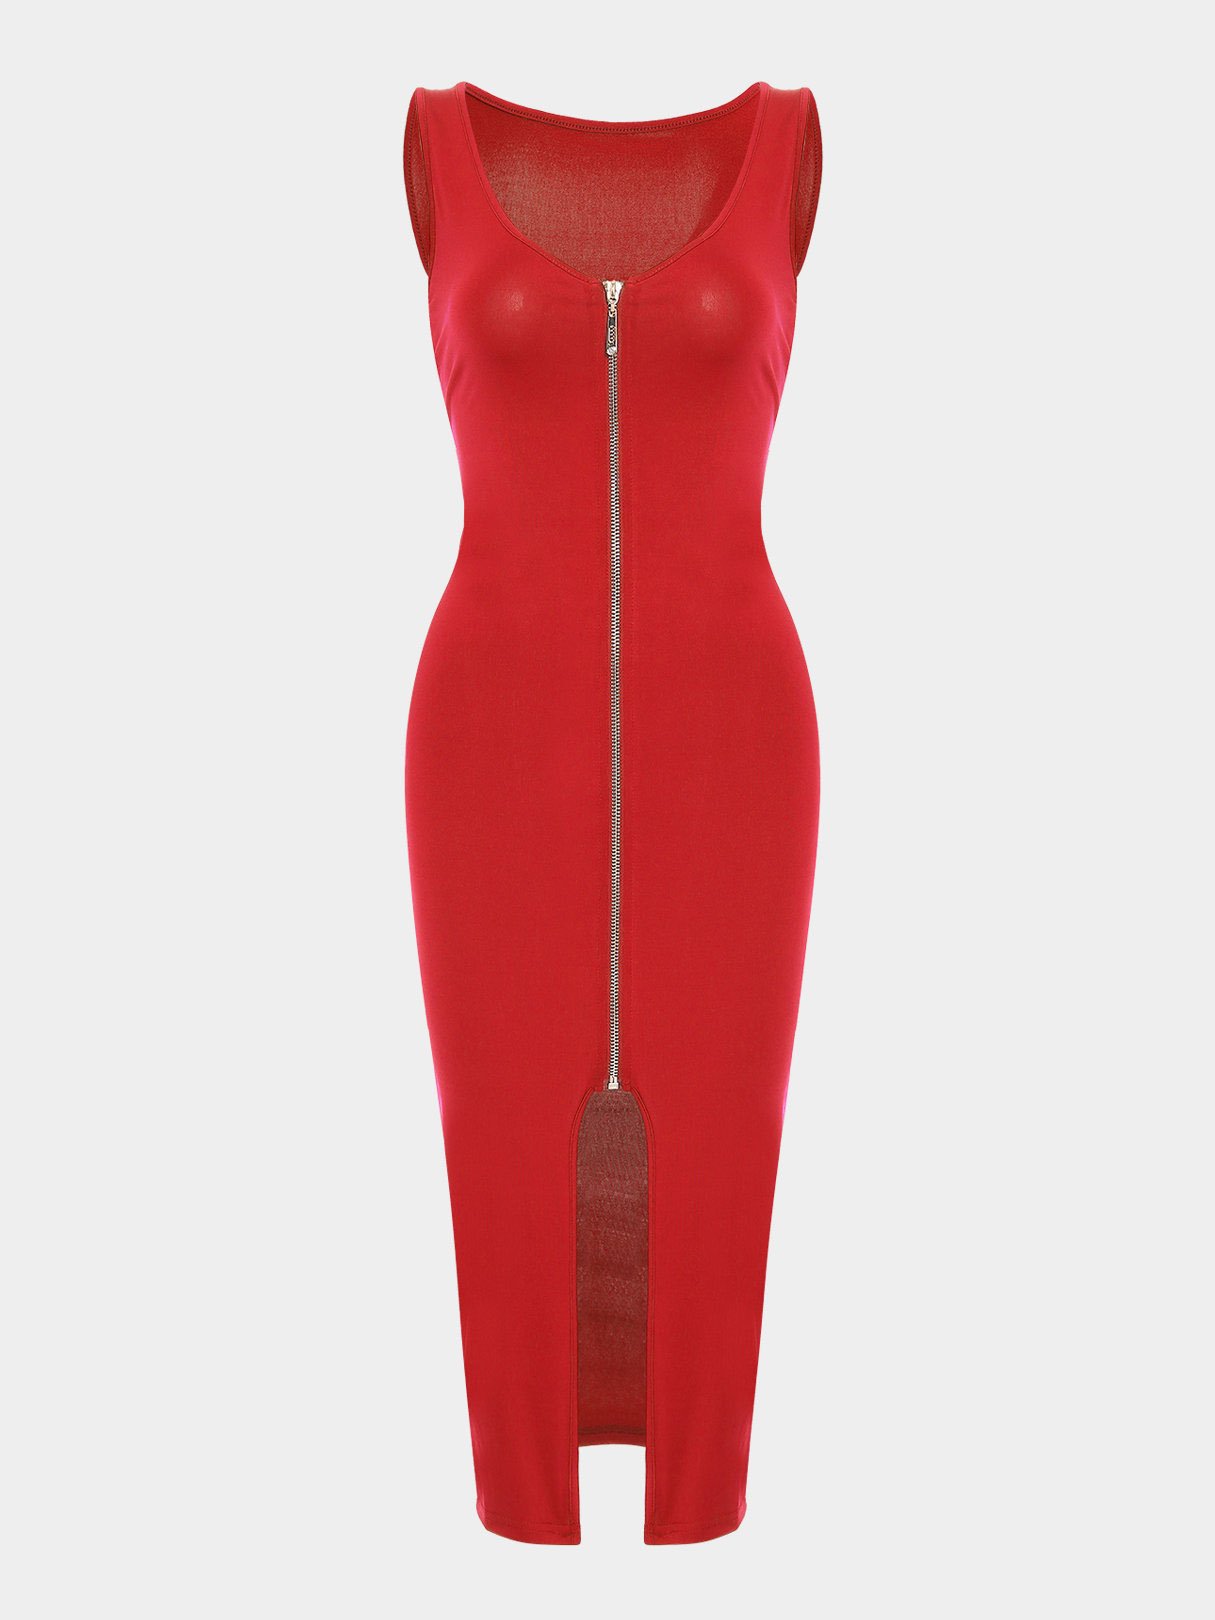 NEW FEELING Womens Red Bodycon Dresses